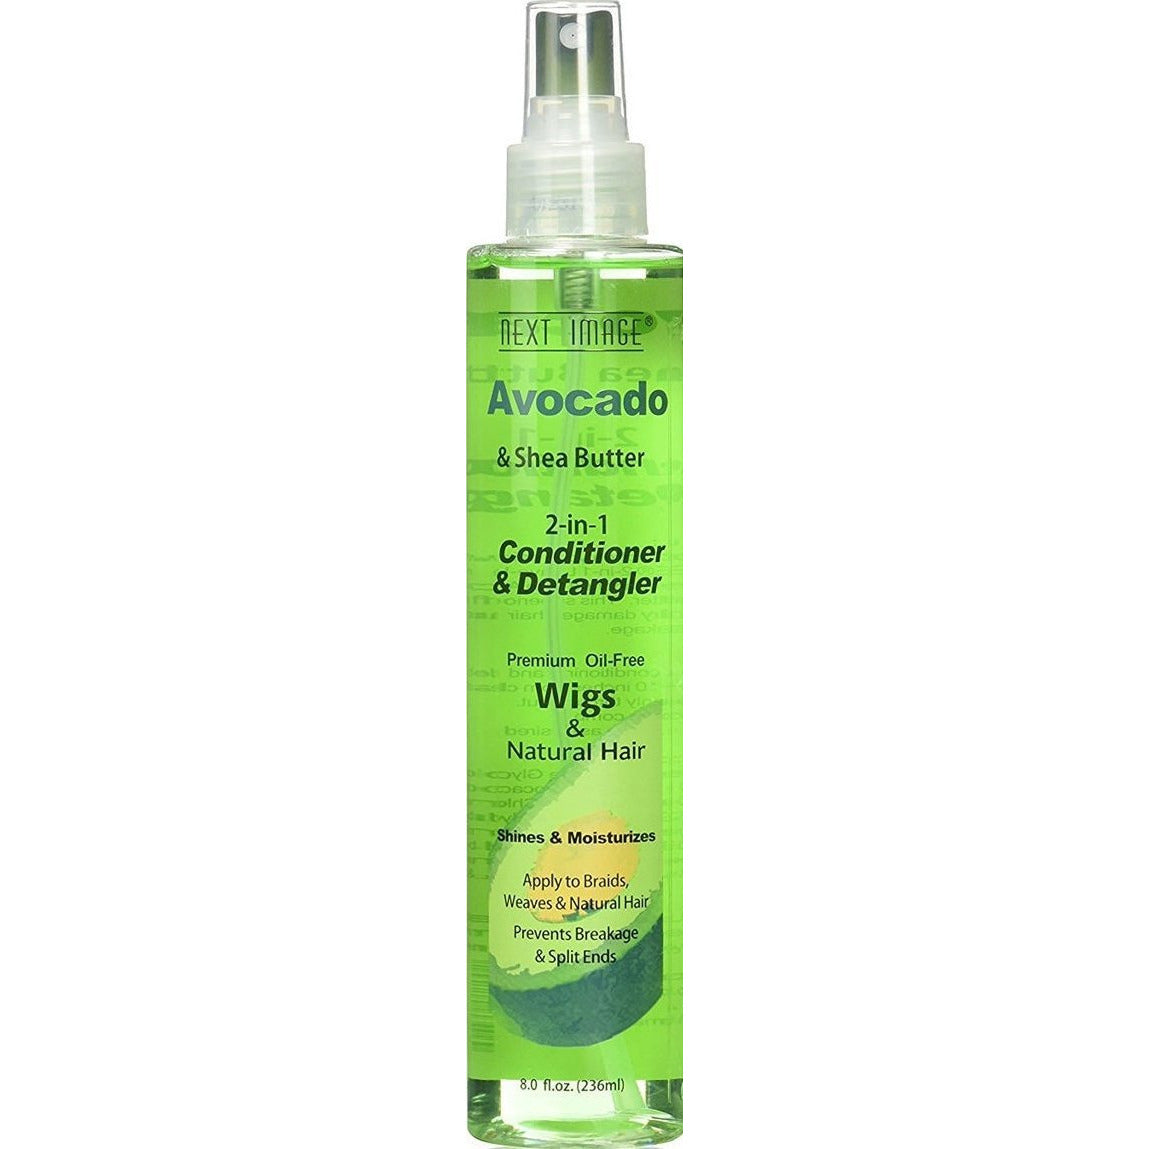 4th Ave Market: On Natural Next Image Avocado & Shea Butter 2-in-1 Conditioner & Detangler, 8 Ounce